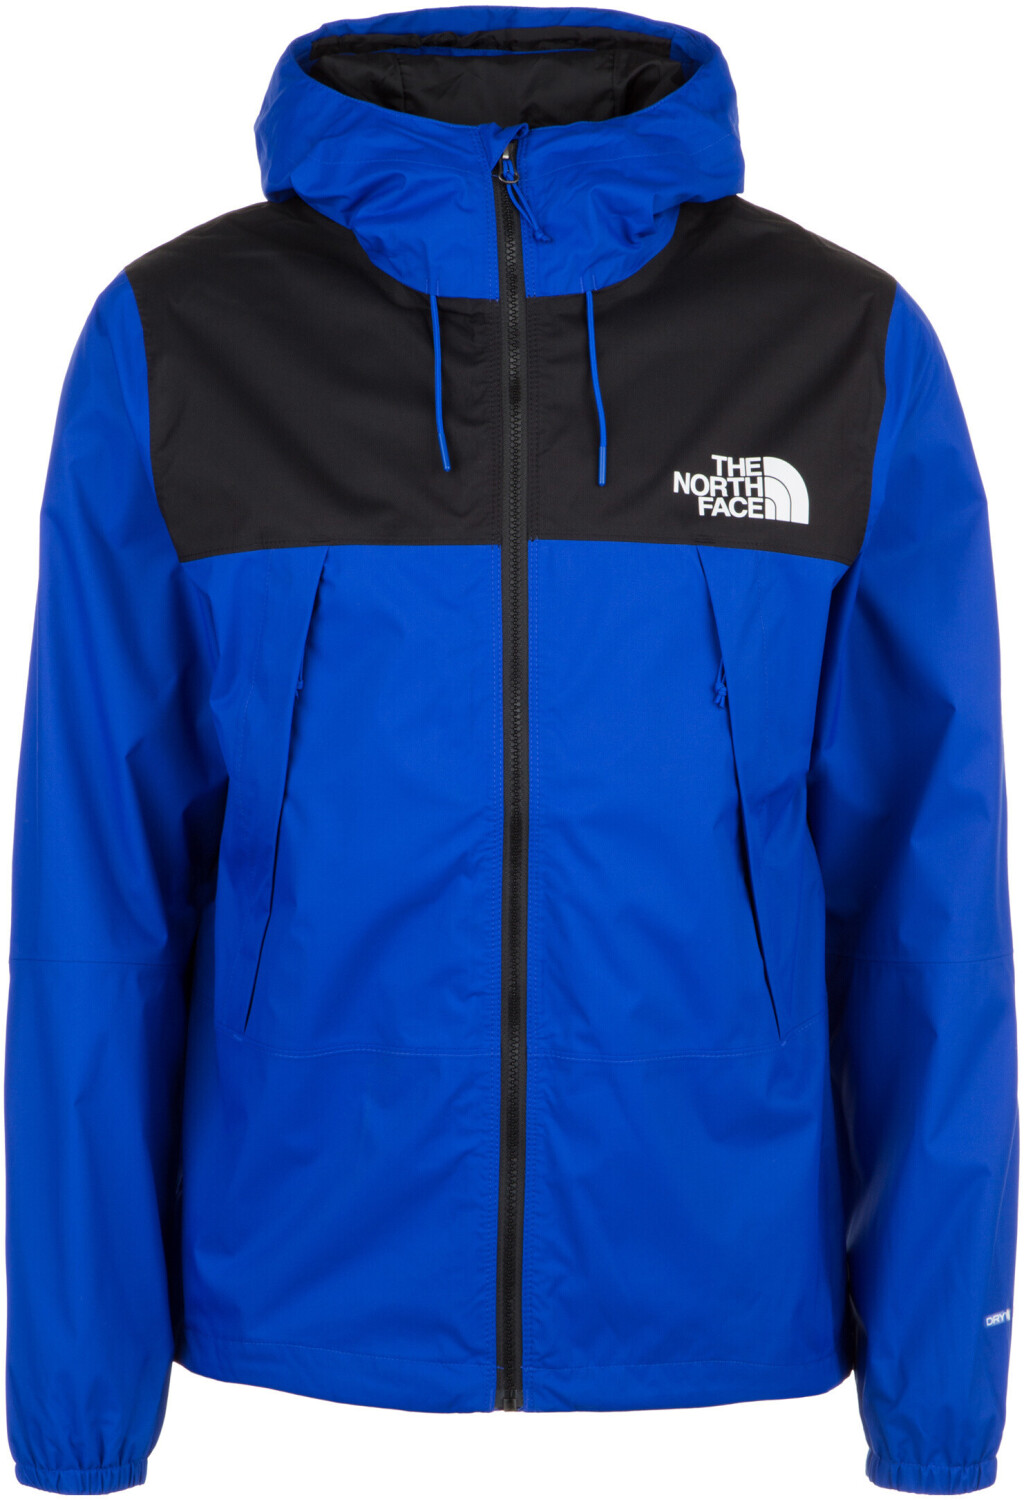 Buy The North Face 1990 Mountain Q Jacket blue from £130.00 (Today ...